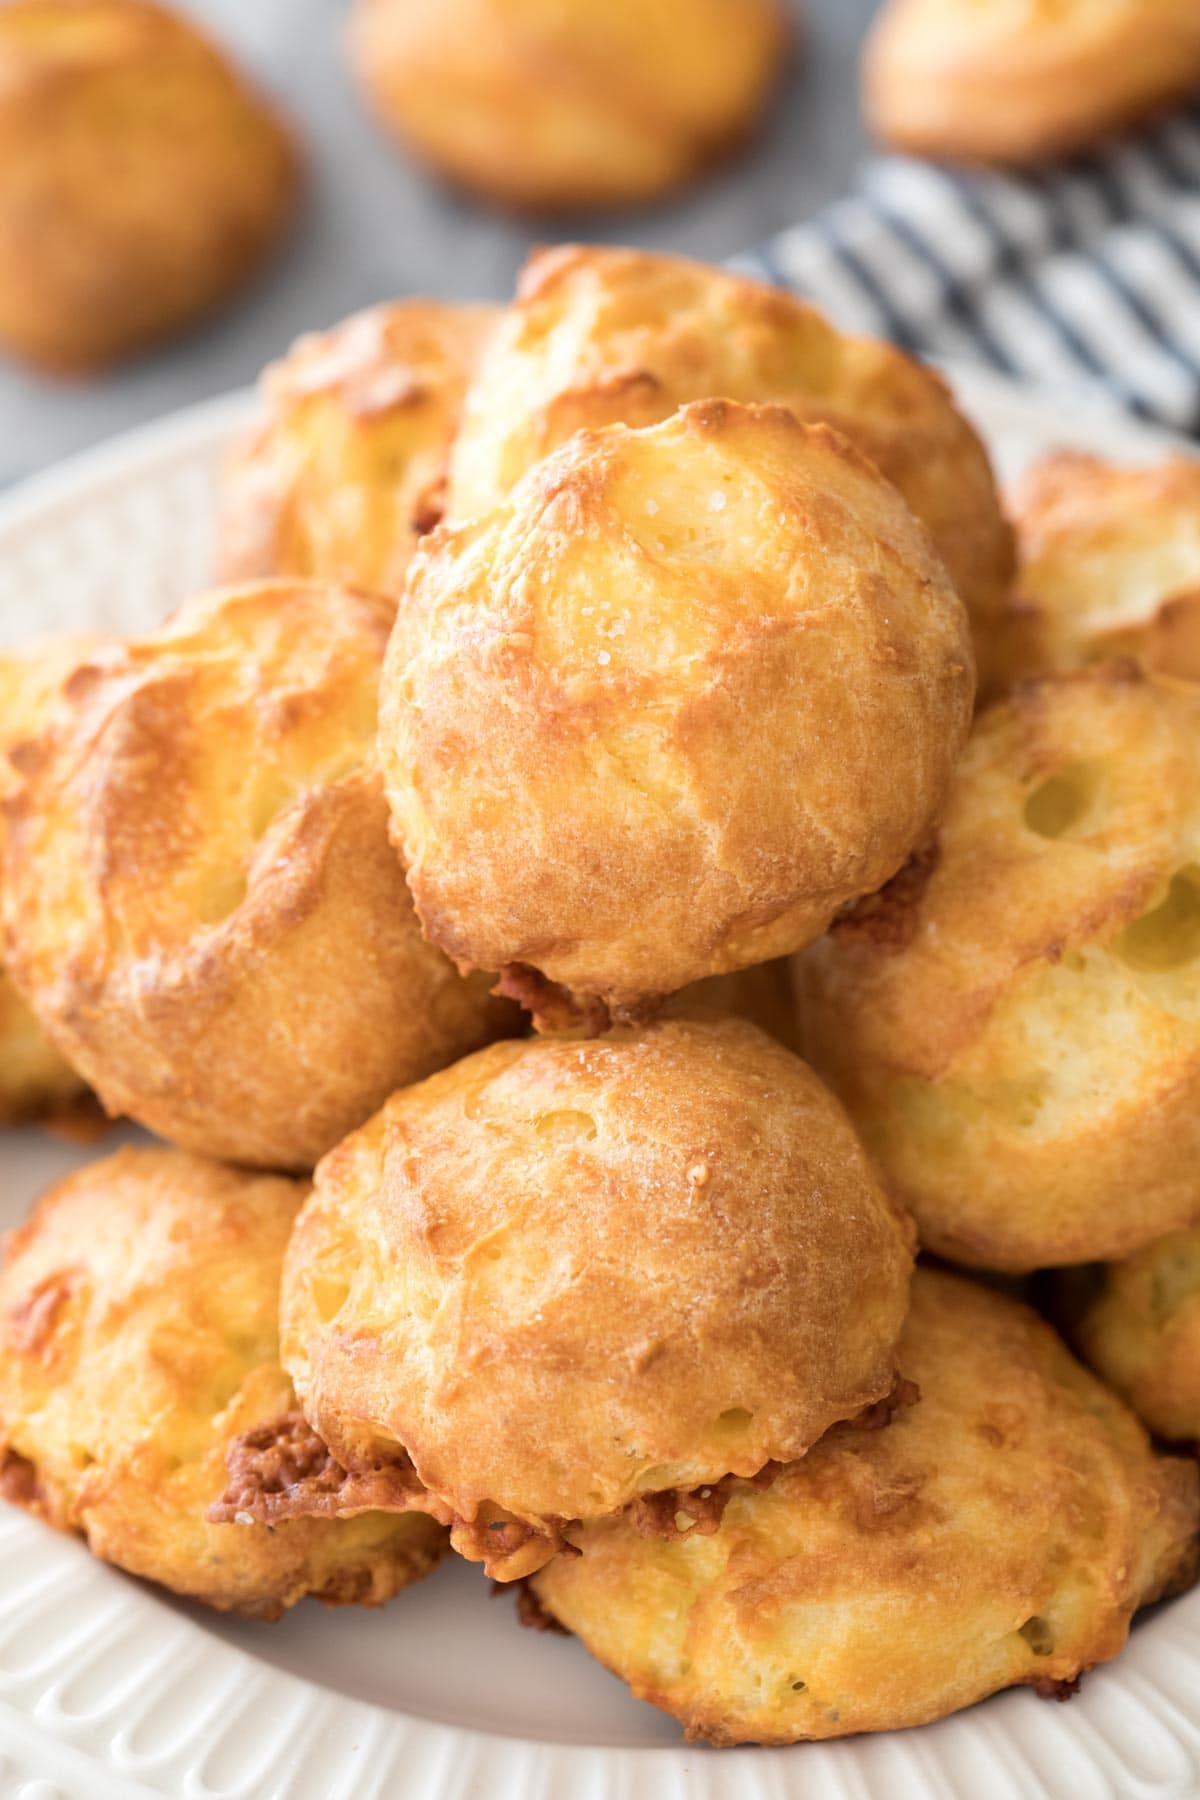 Pile of gougeres on white plate